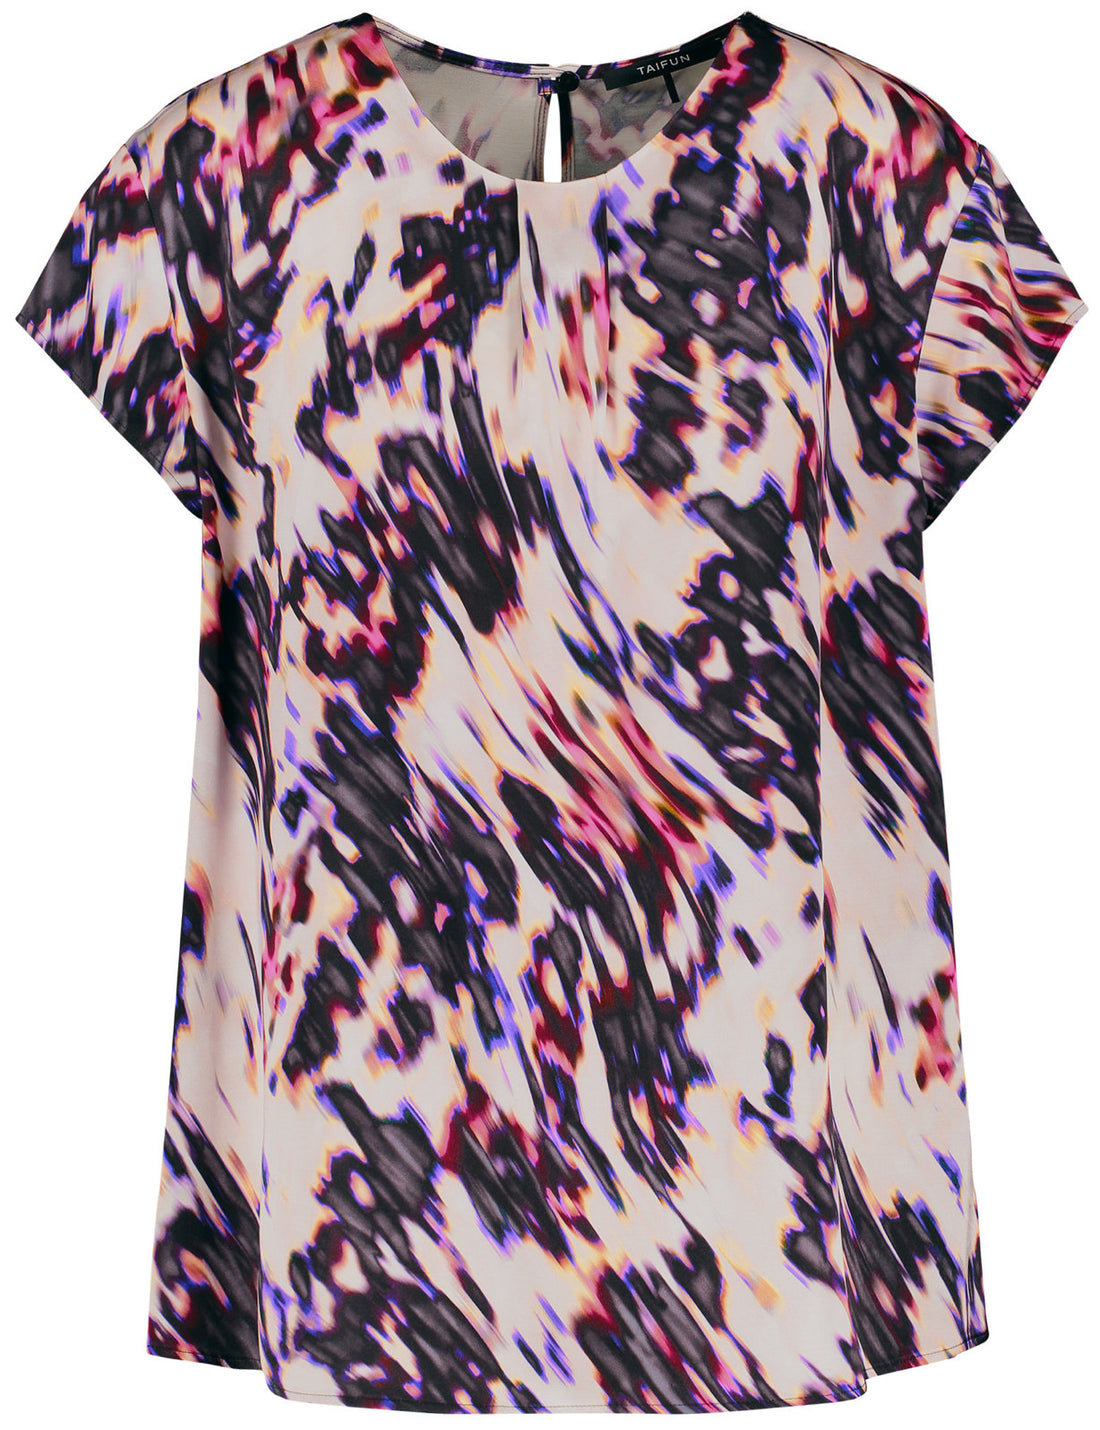 Fine Blouse Top With An All-Over Print_560316-11009_9452_02